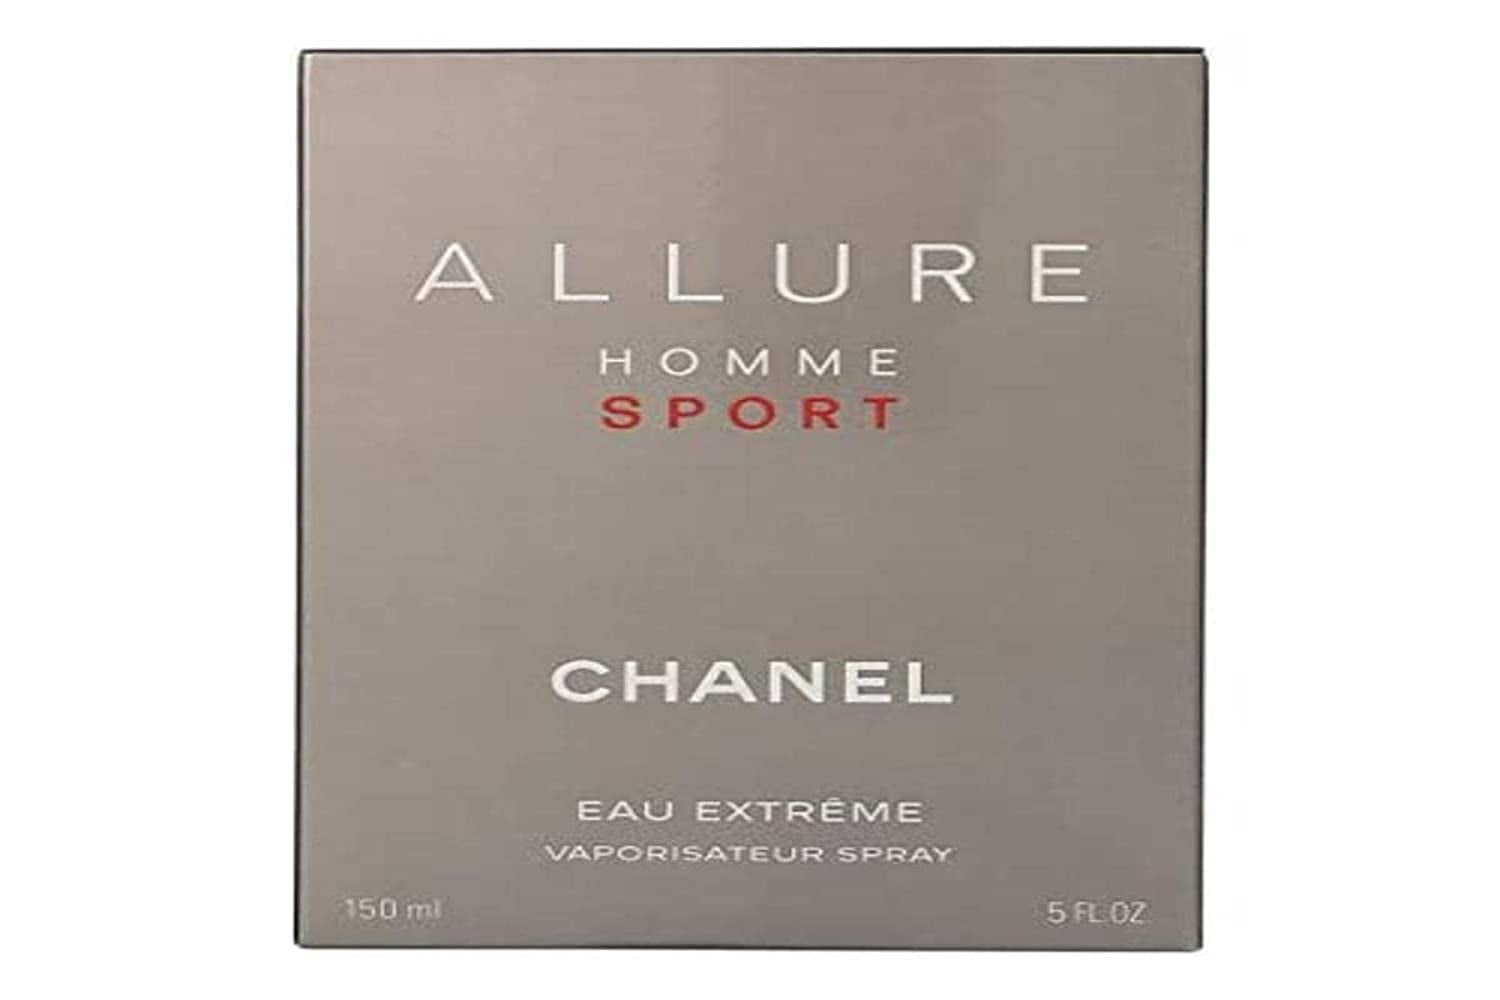 ☑️ Allure Homme Sport Eau Extreme Chanel for men by @chanelofficial ☑️100ml  ☑️Made in France ☑️100% original 🚐Available delivery…